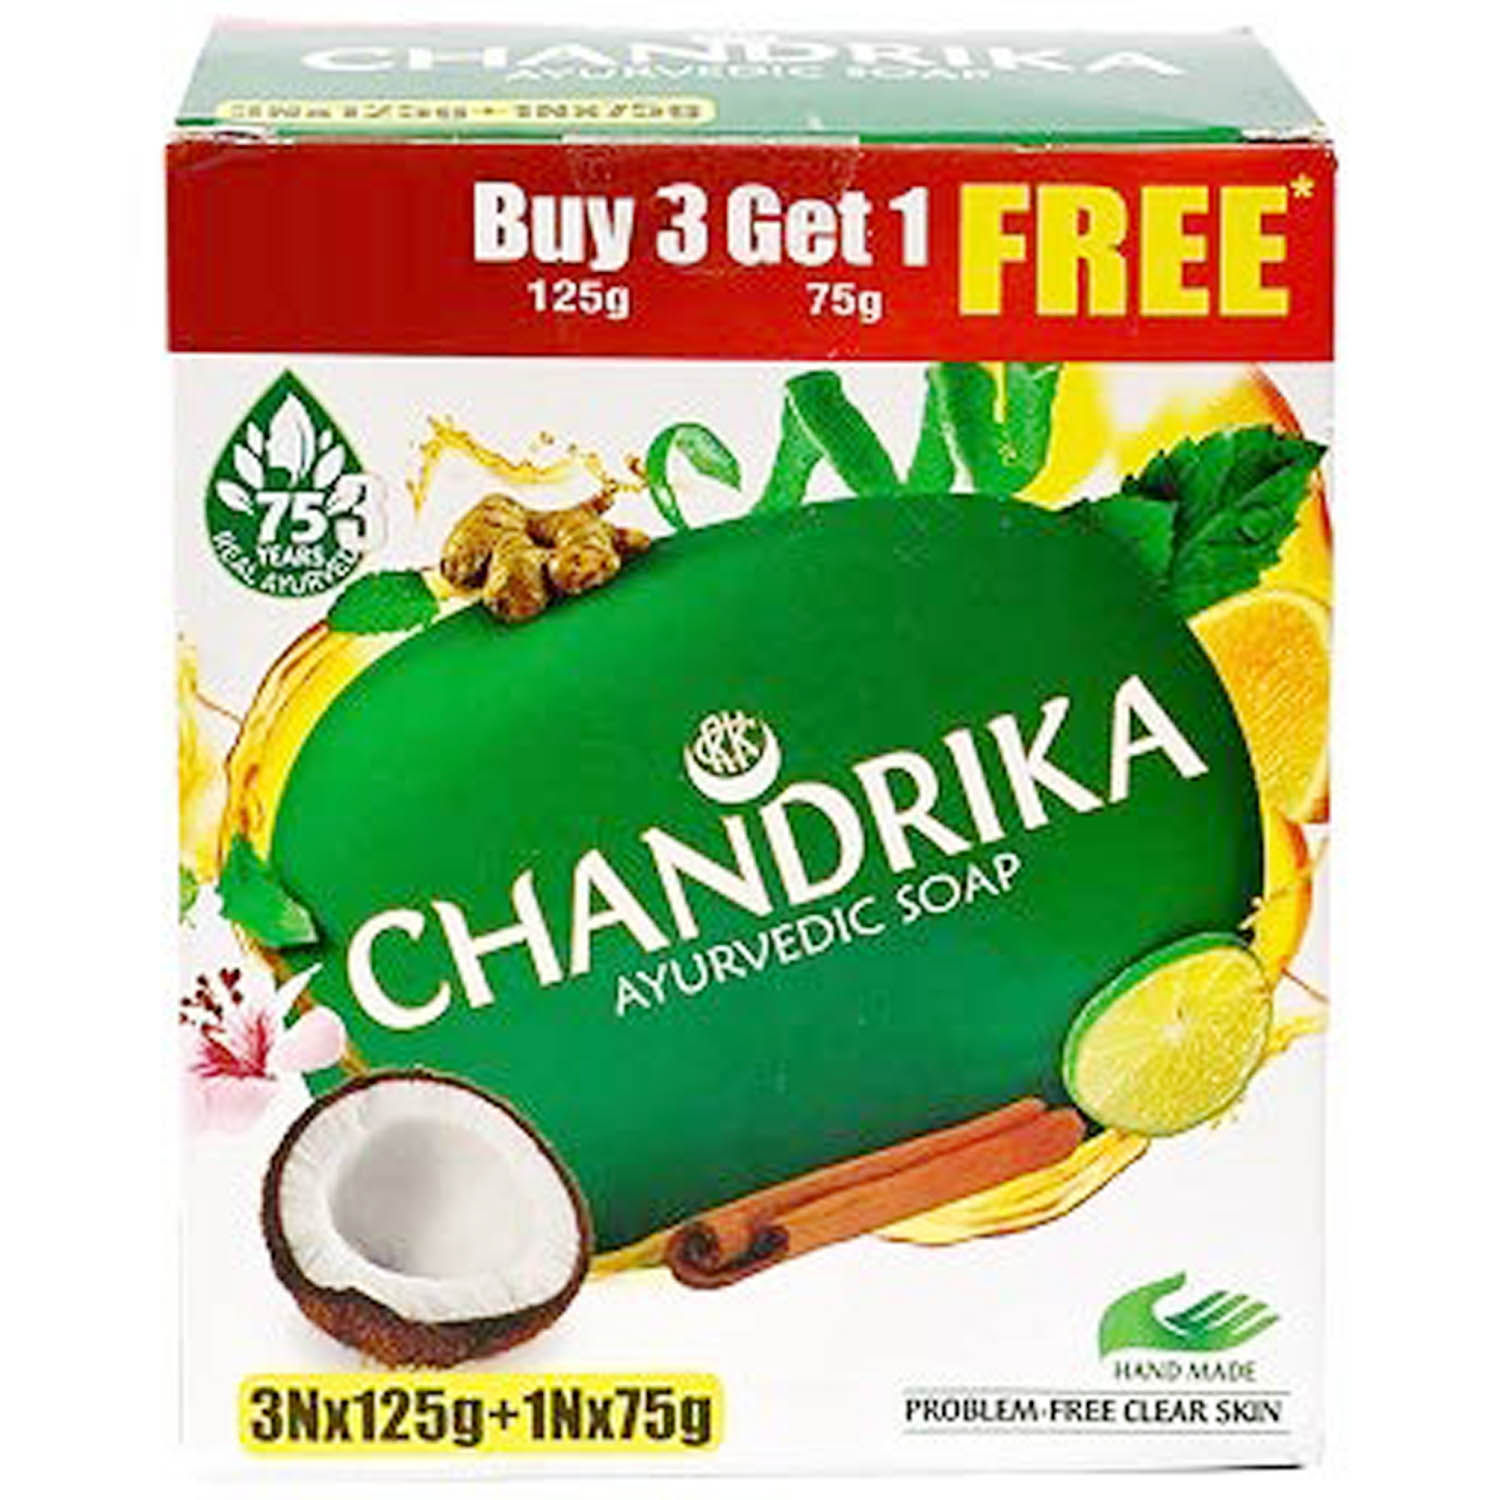 Buy Chandrika Ayurvedic Soap, 450 gm (3 x 125 gm) With one Free 75 gm Soap Online